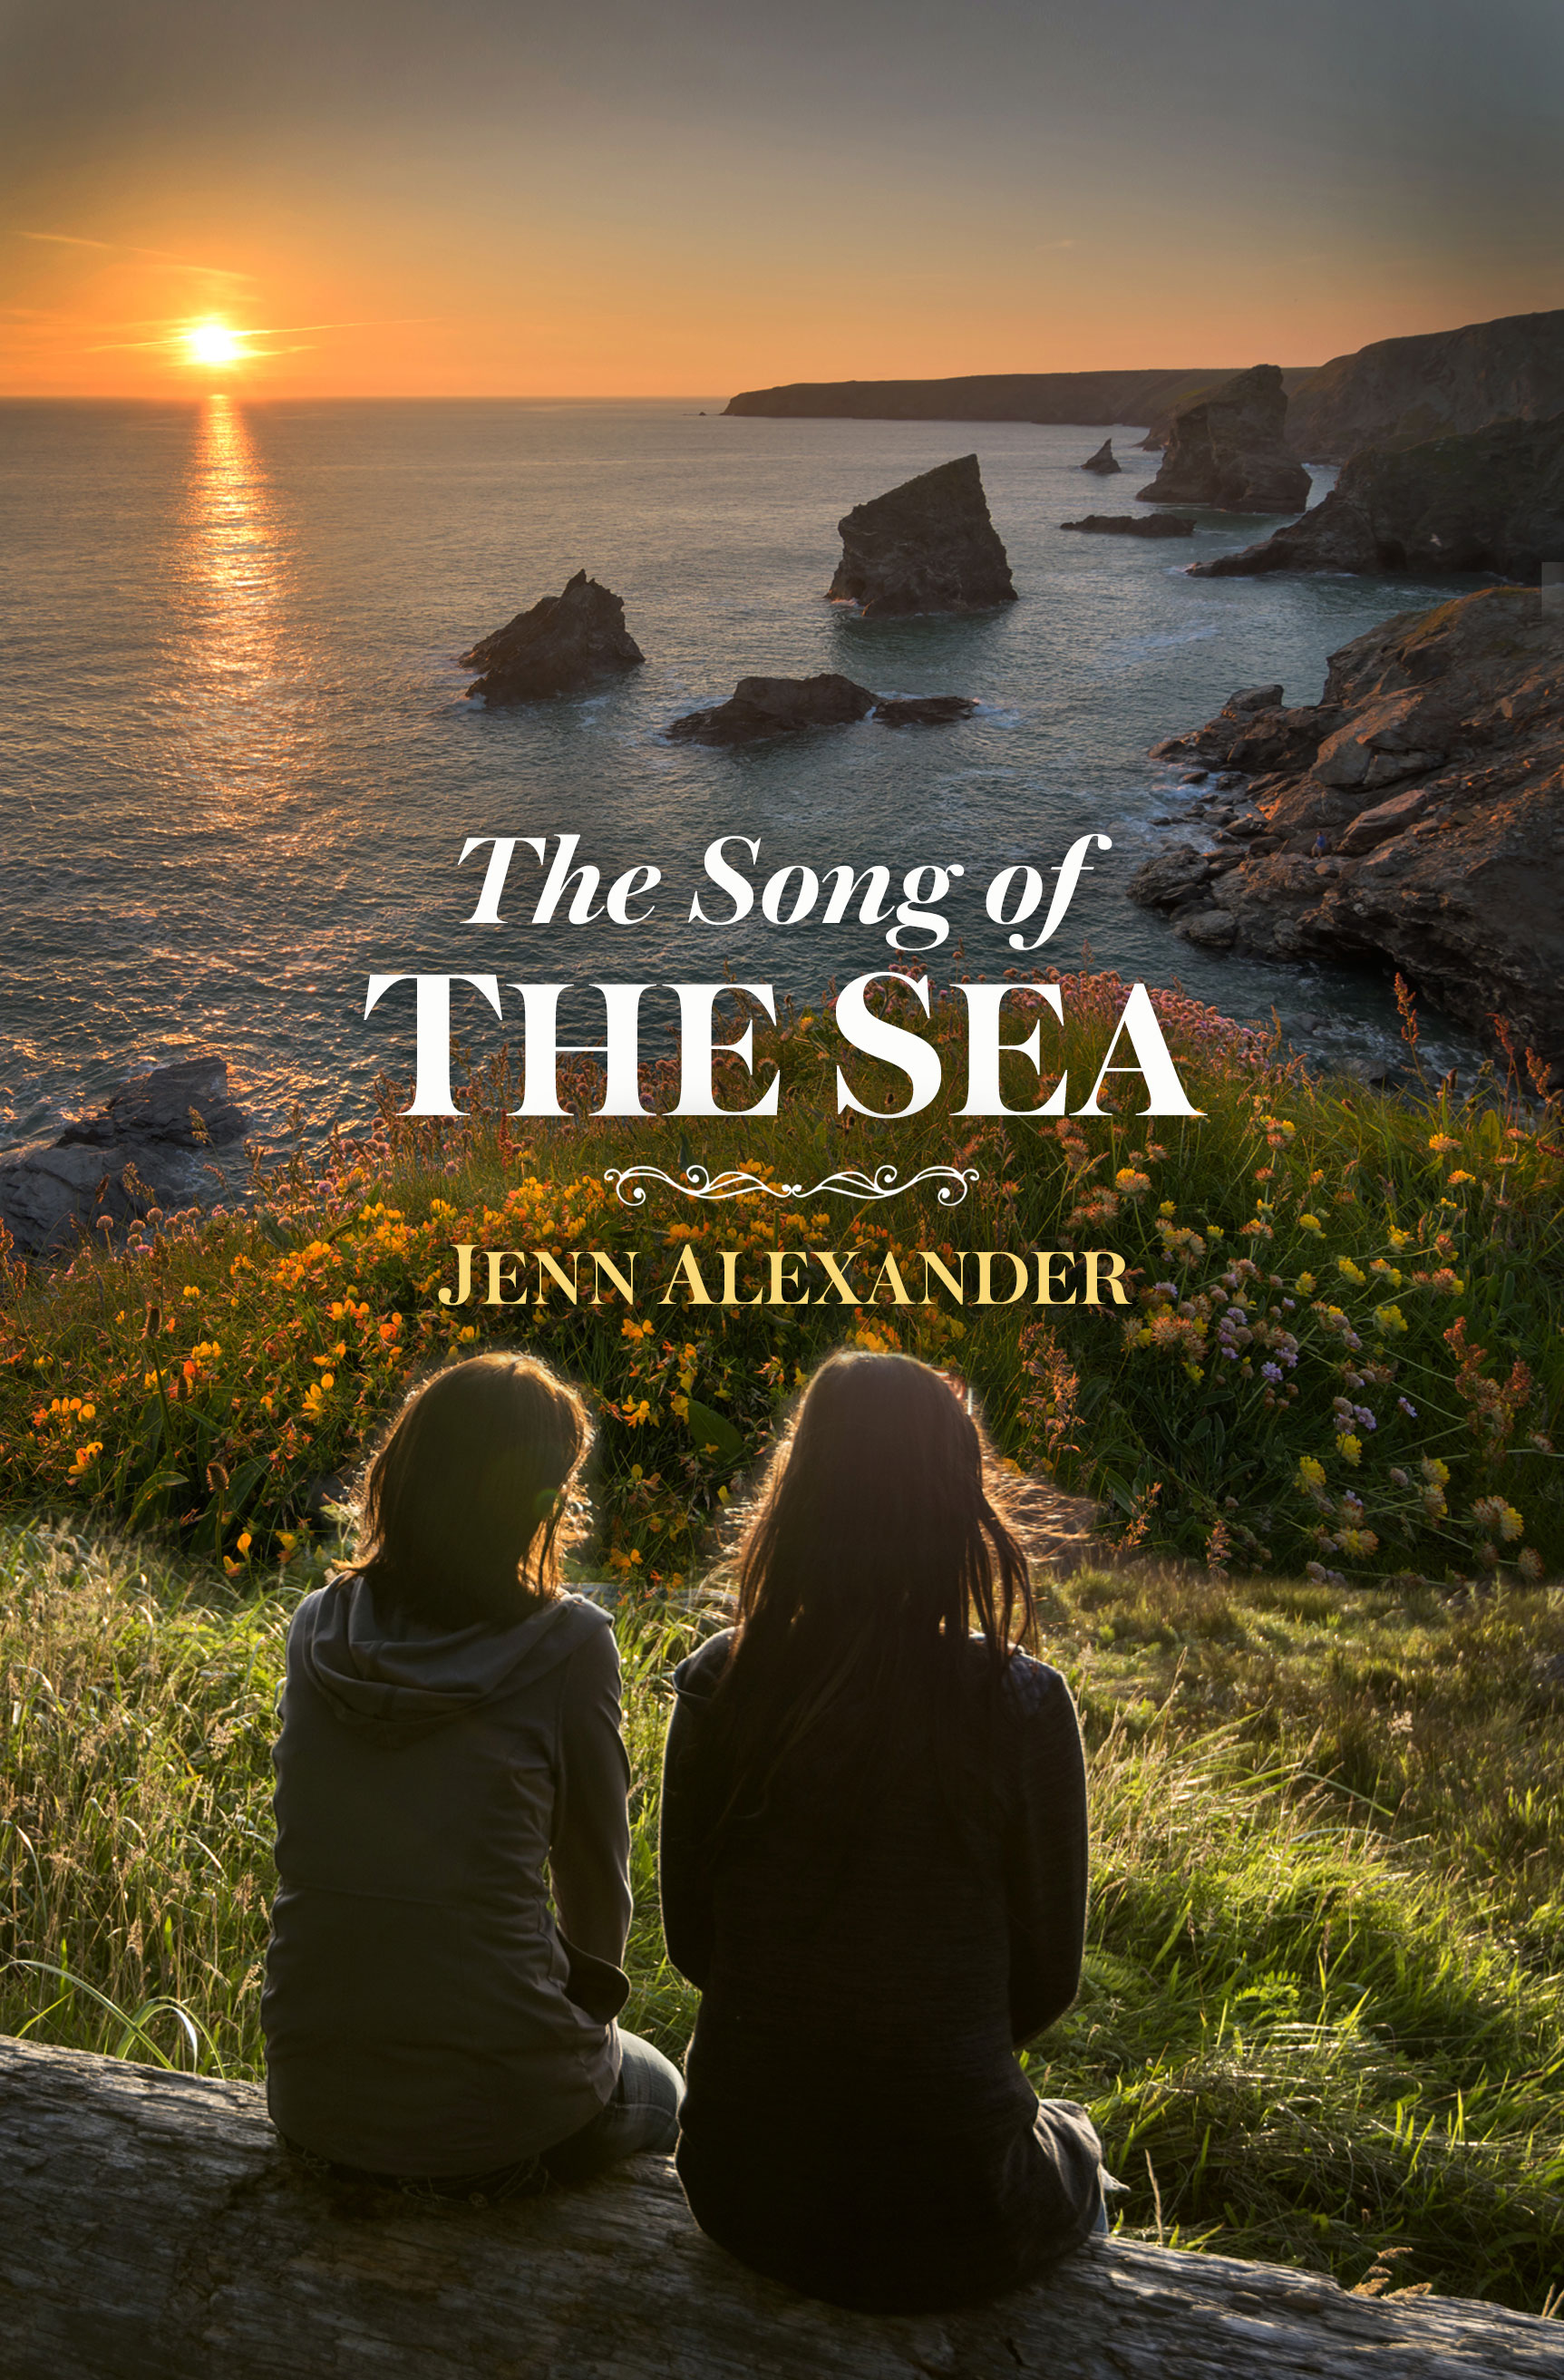 The Song of the Sea